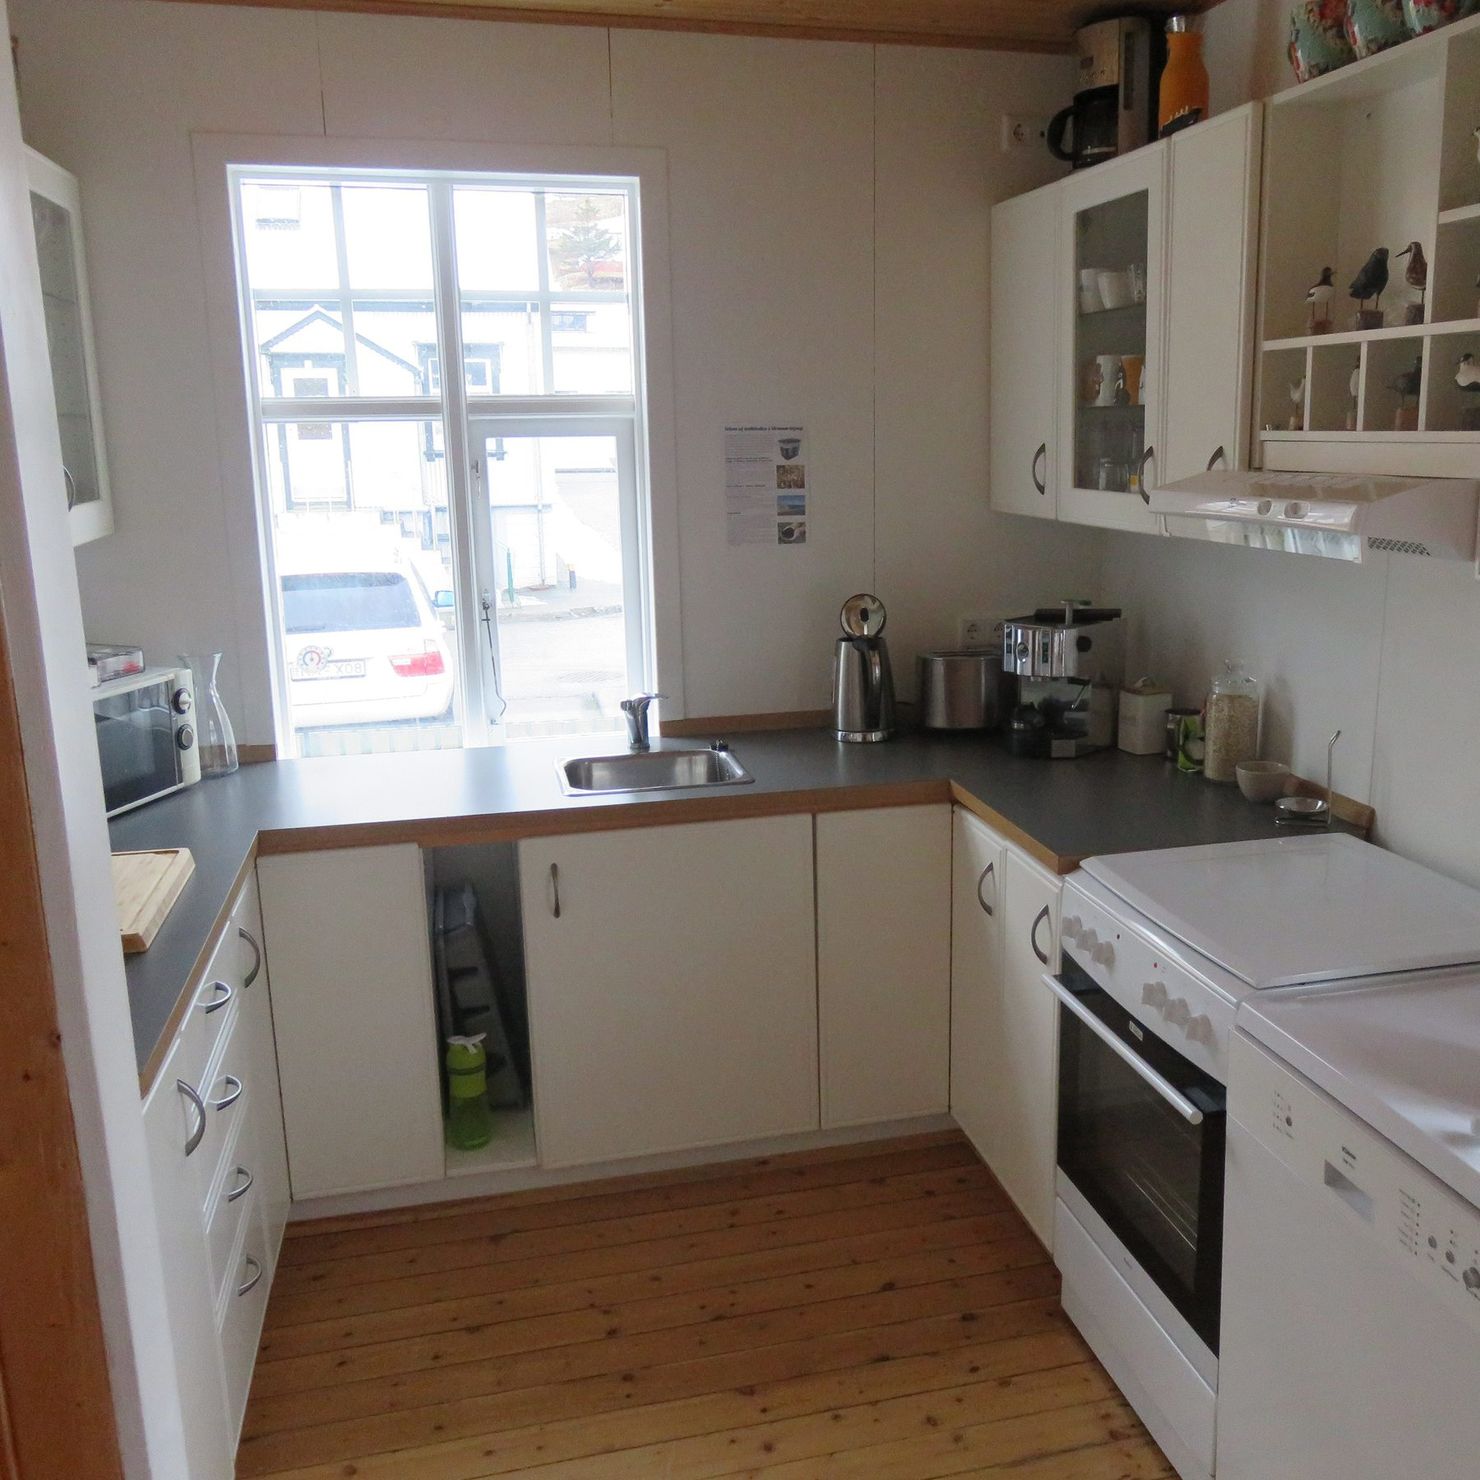 The kitchen is spacious, very bright due to the large window and perfect for cooking